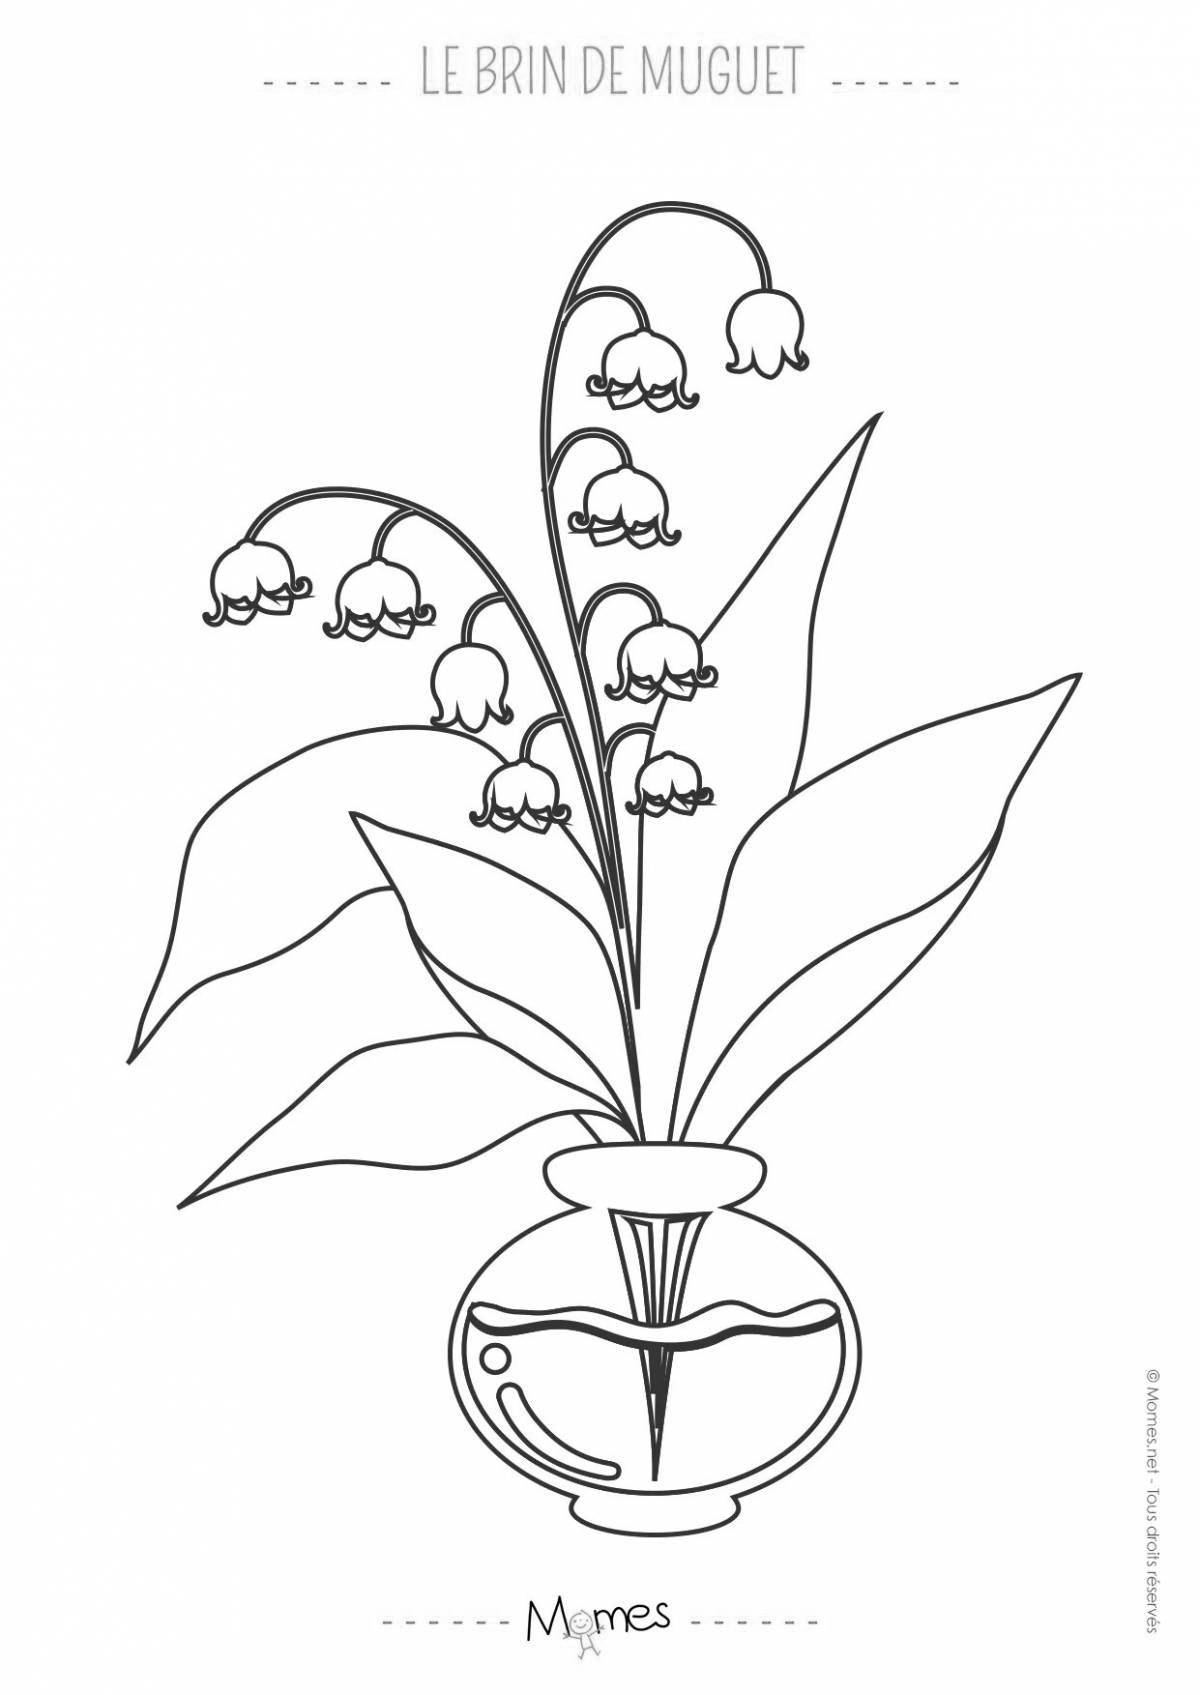 Playful lily of the valley coloring book for kids